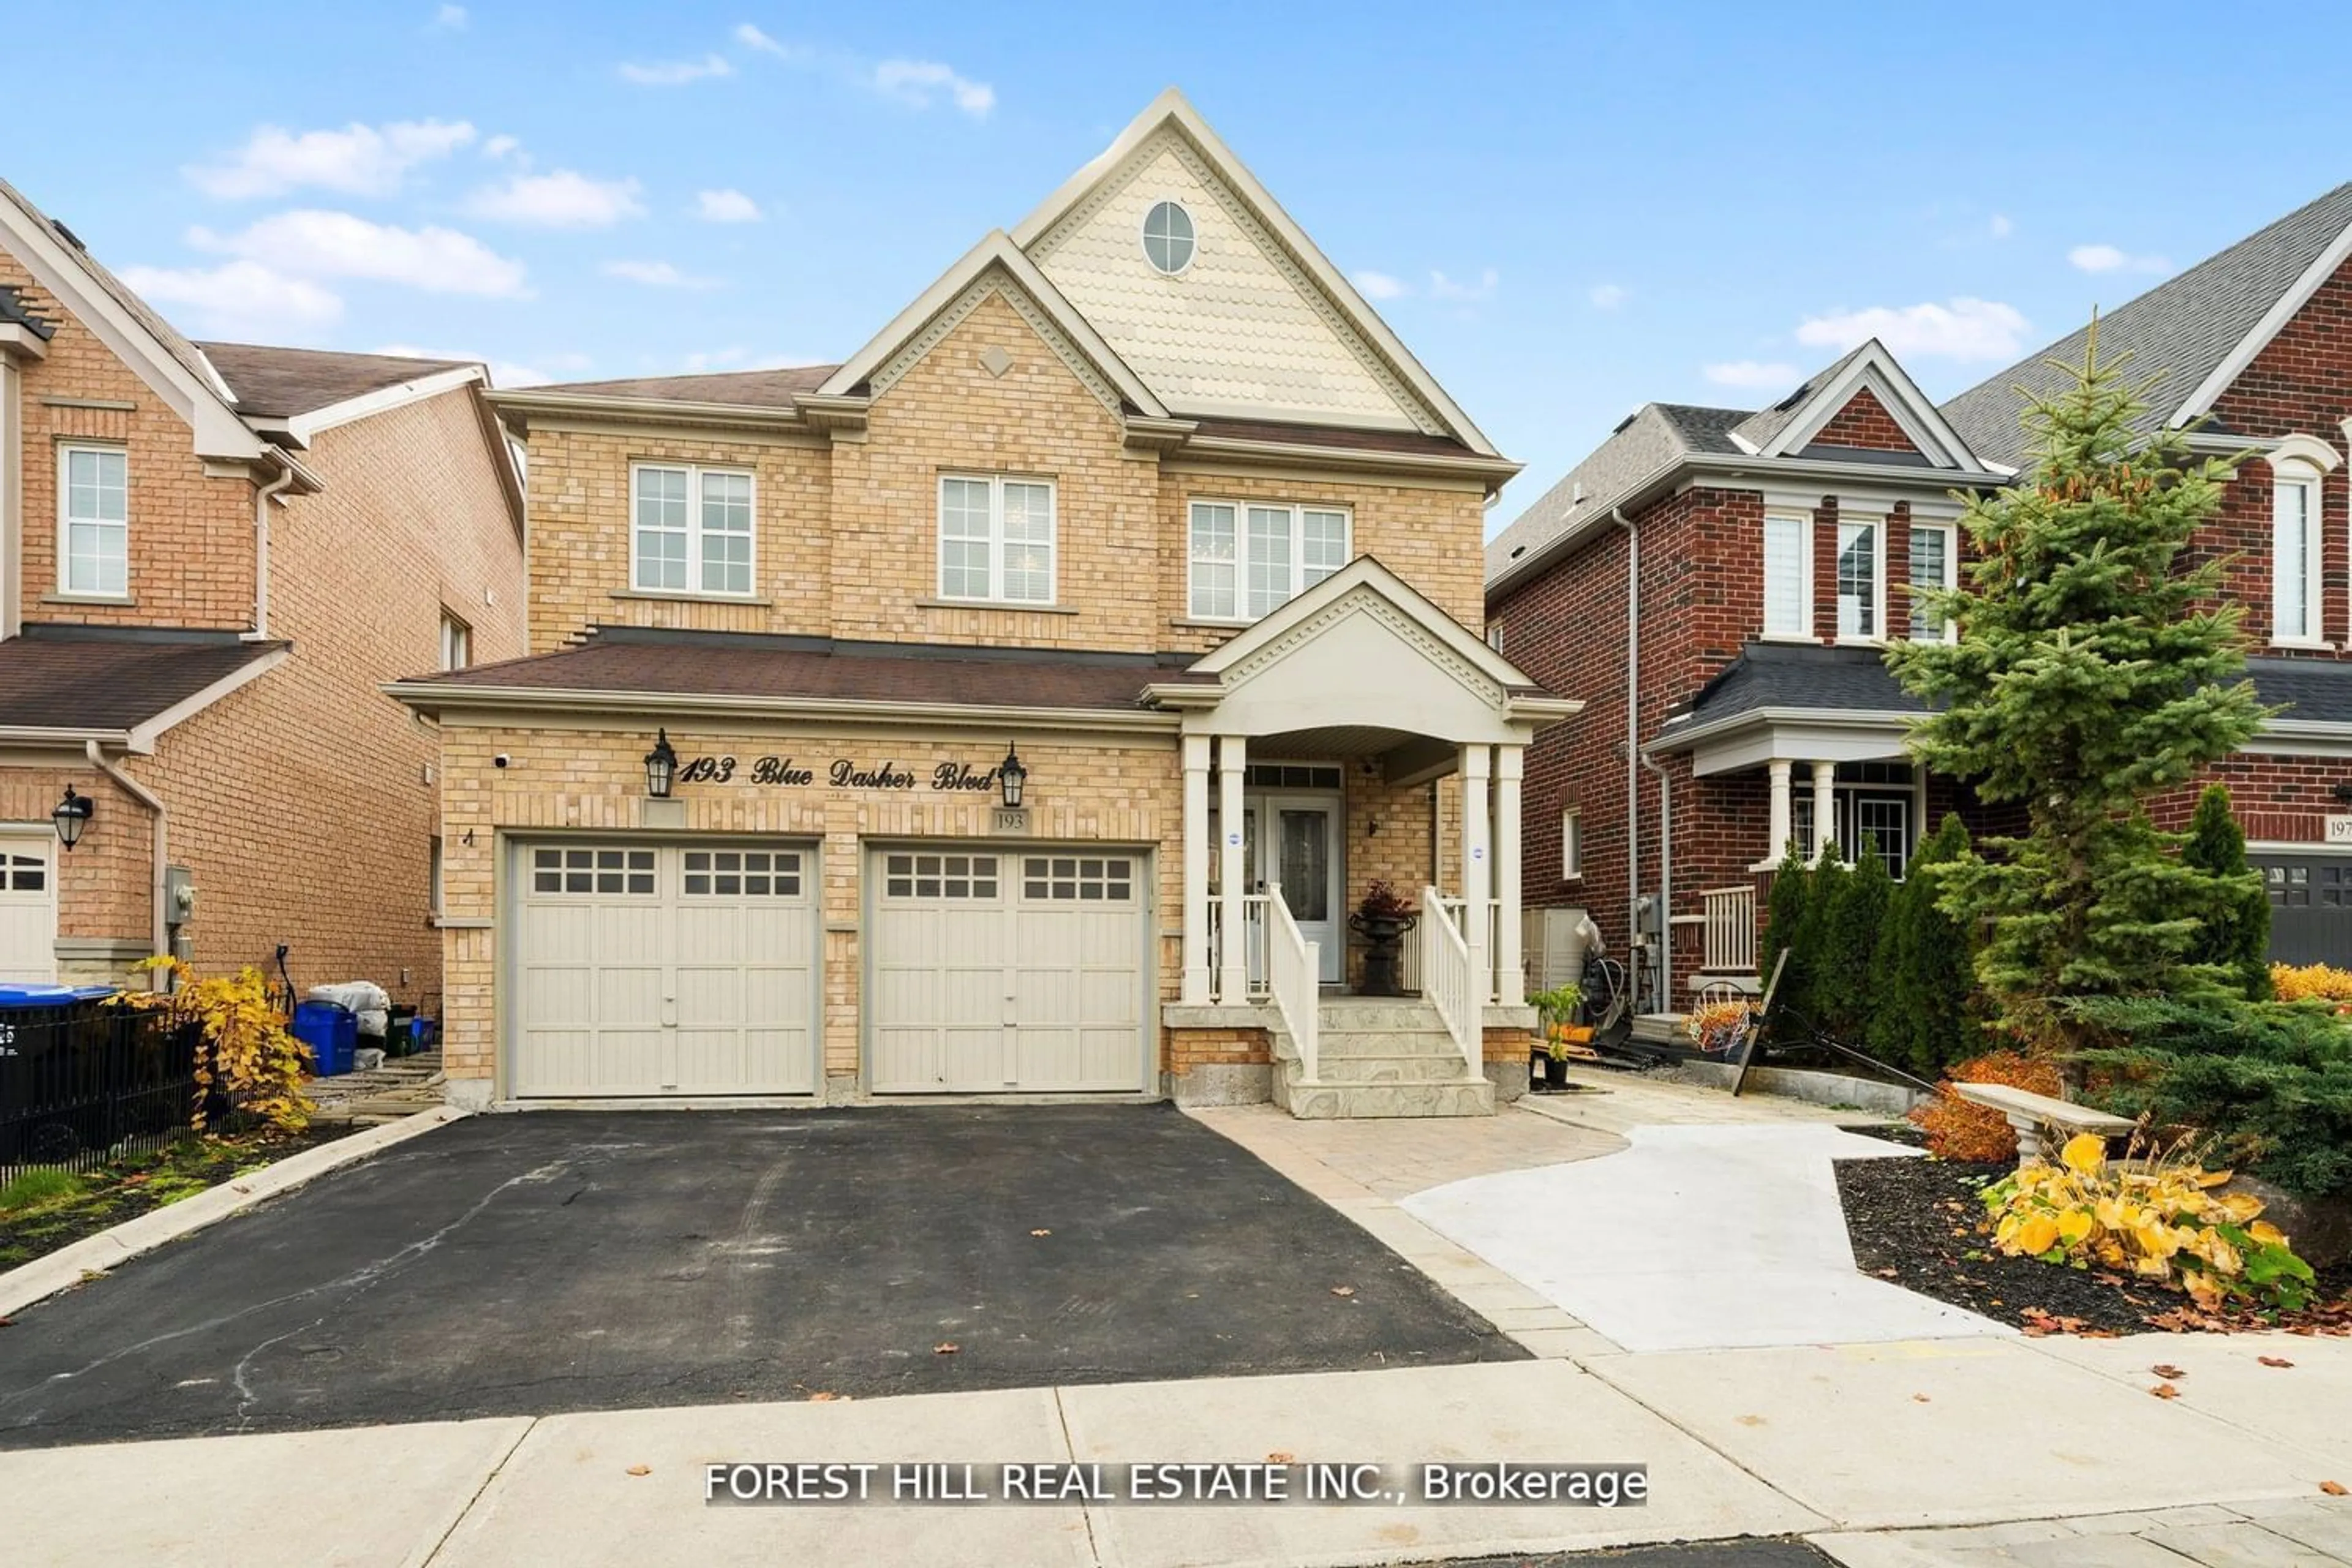 Home with brick exterior material for 193 Blue Dasher Blvd, Bradford West Gwillimbury Ontario L3Z 0H3